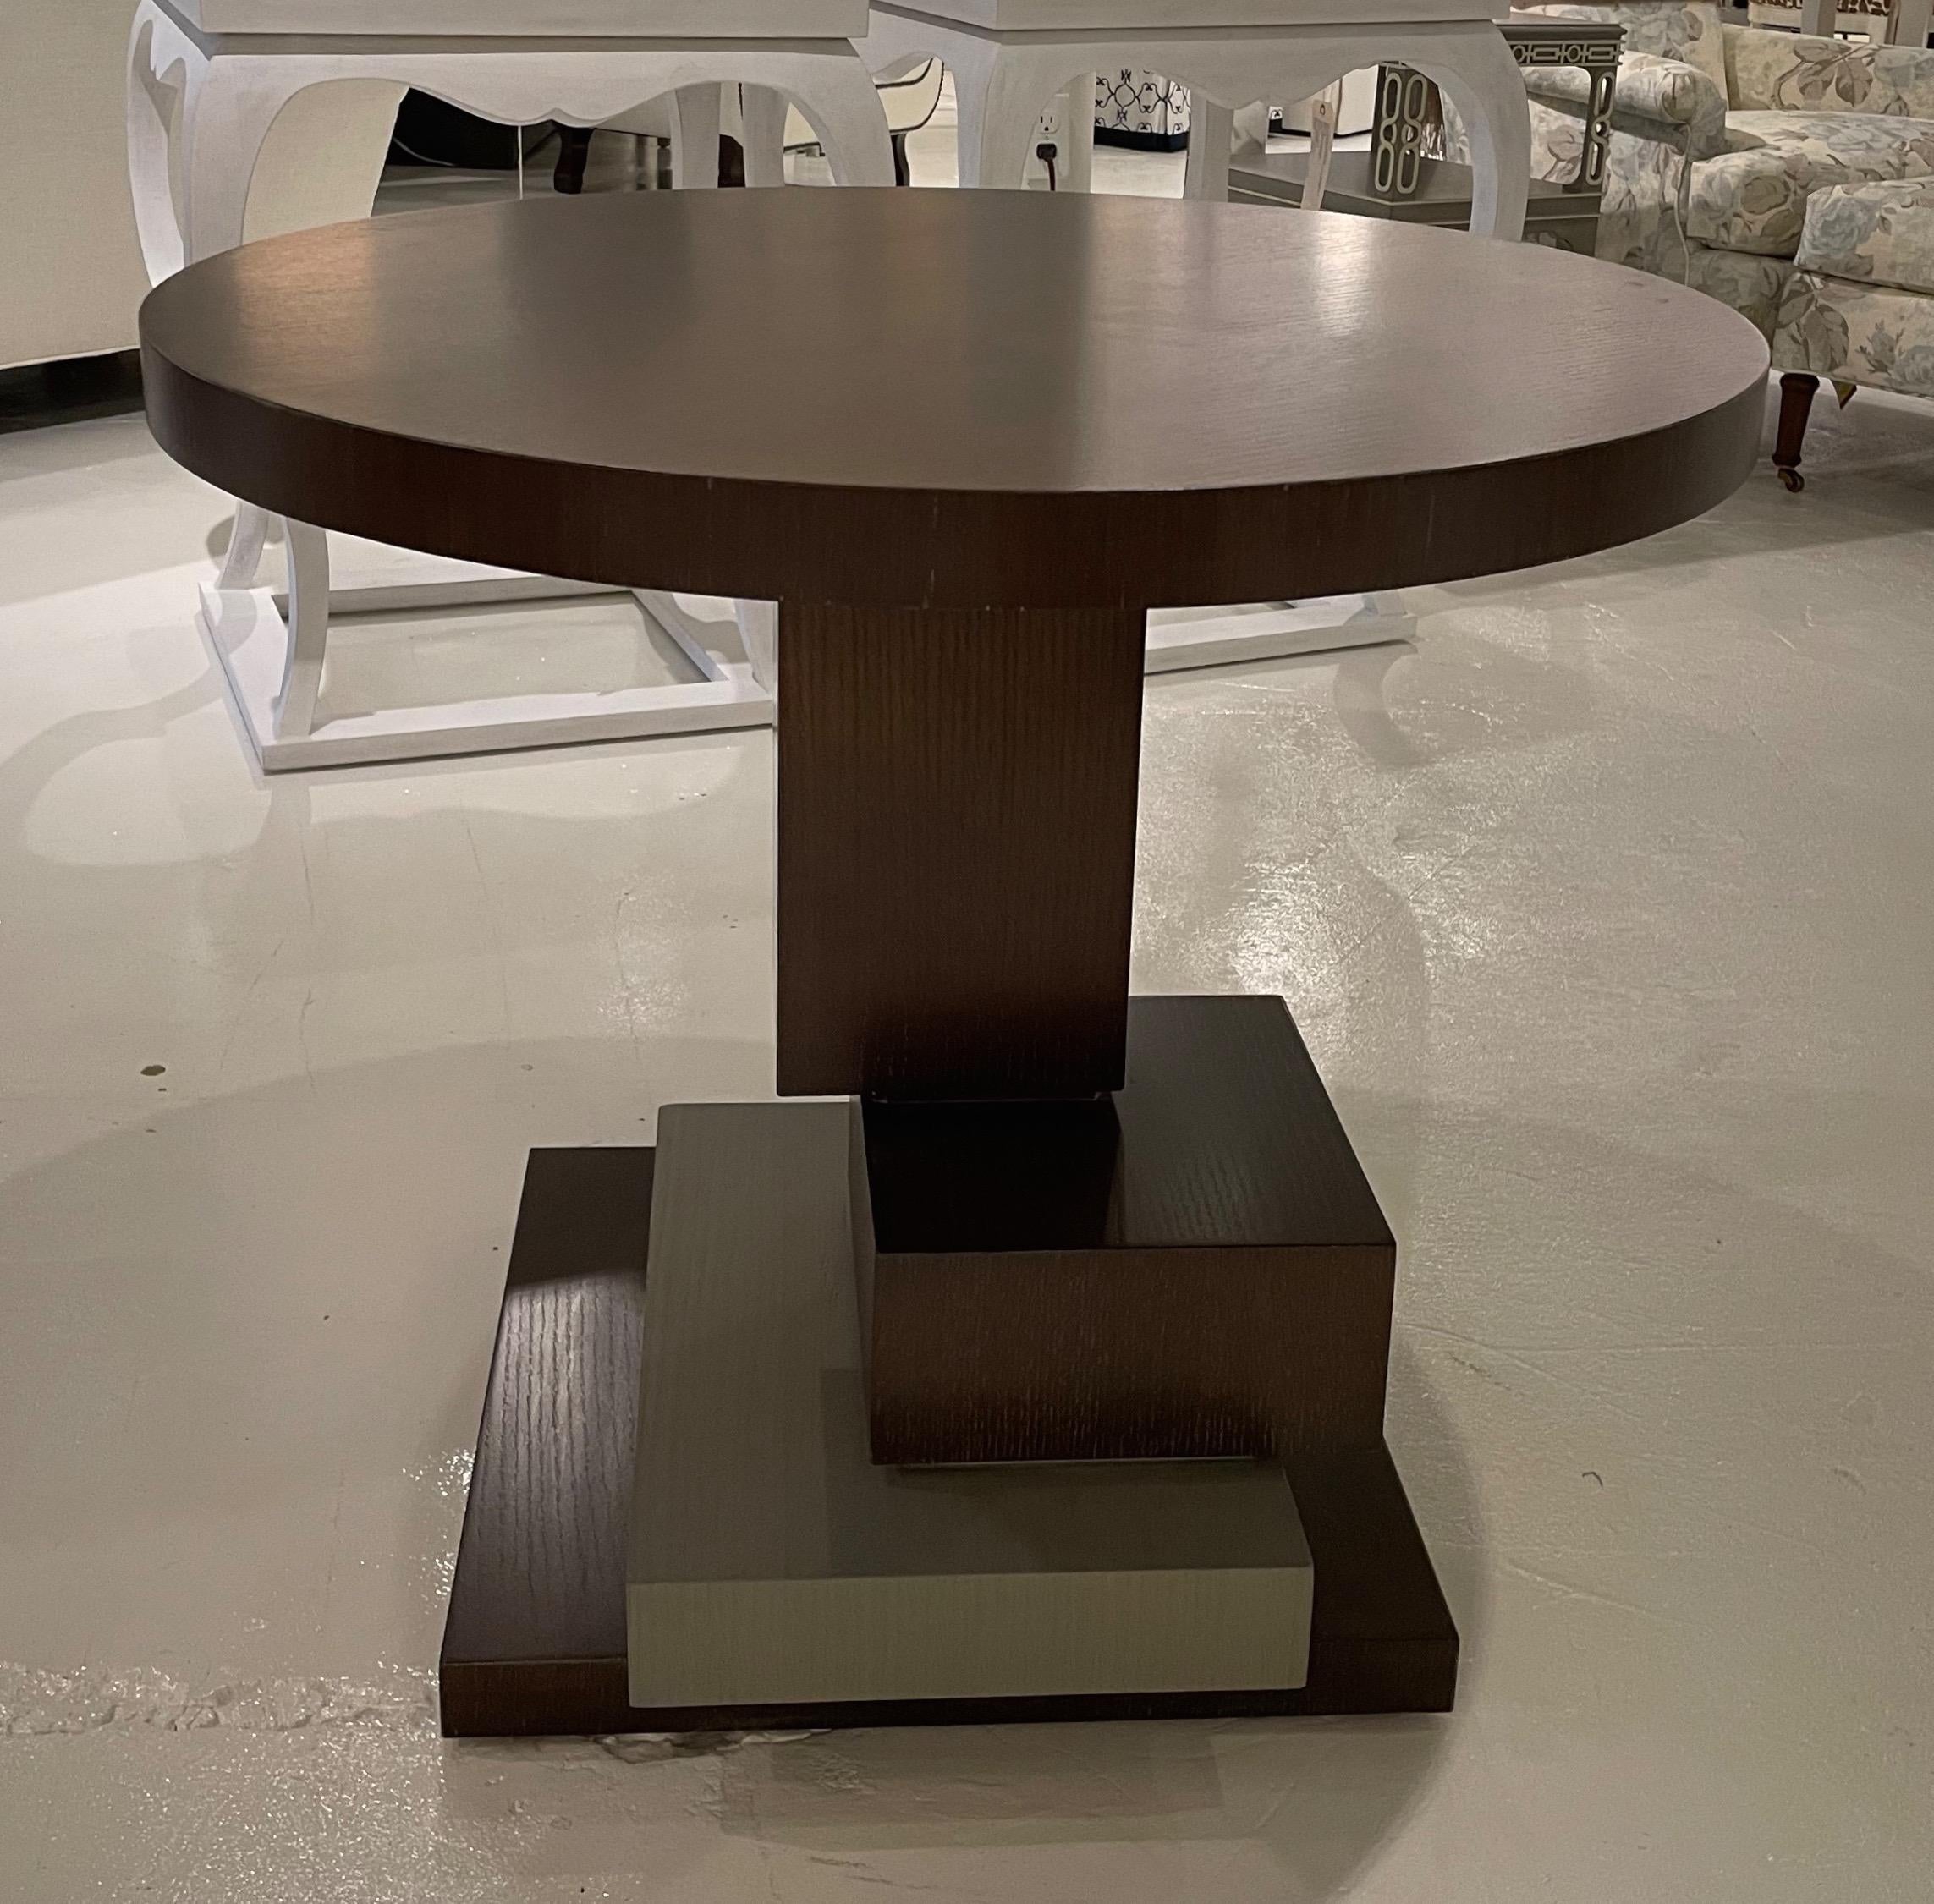 Showroom new - century's vienna echo chairside table - cerused coffee Finish with a gray wash contrasting finish on the base. A sculptural stacked base and a generously scaled top is ideal for the modern, transitional or fresh traditional space.